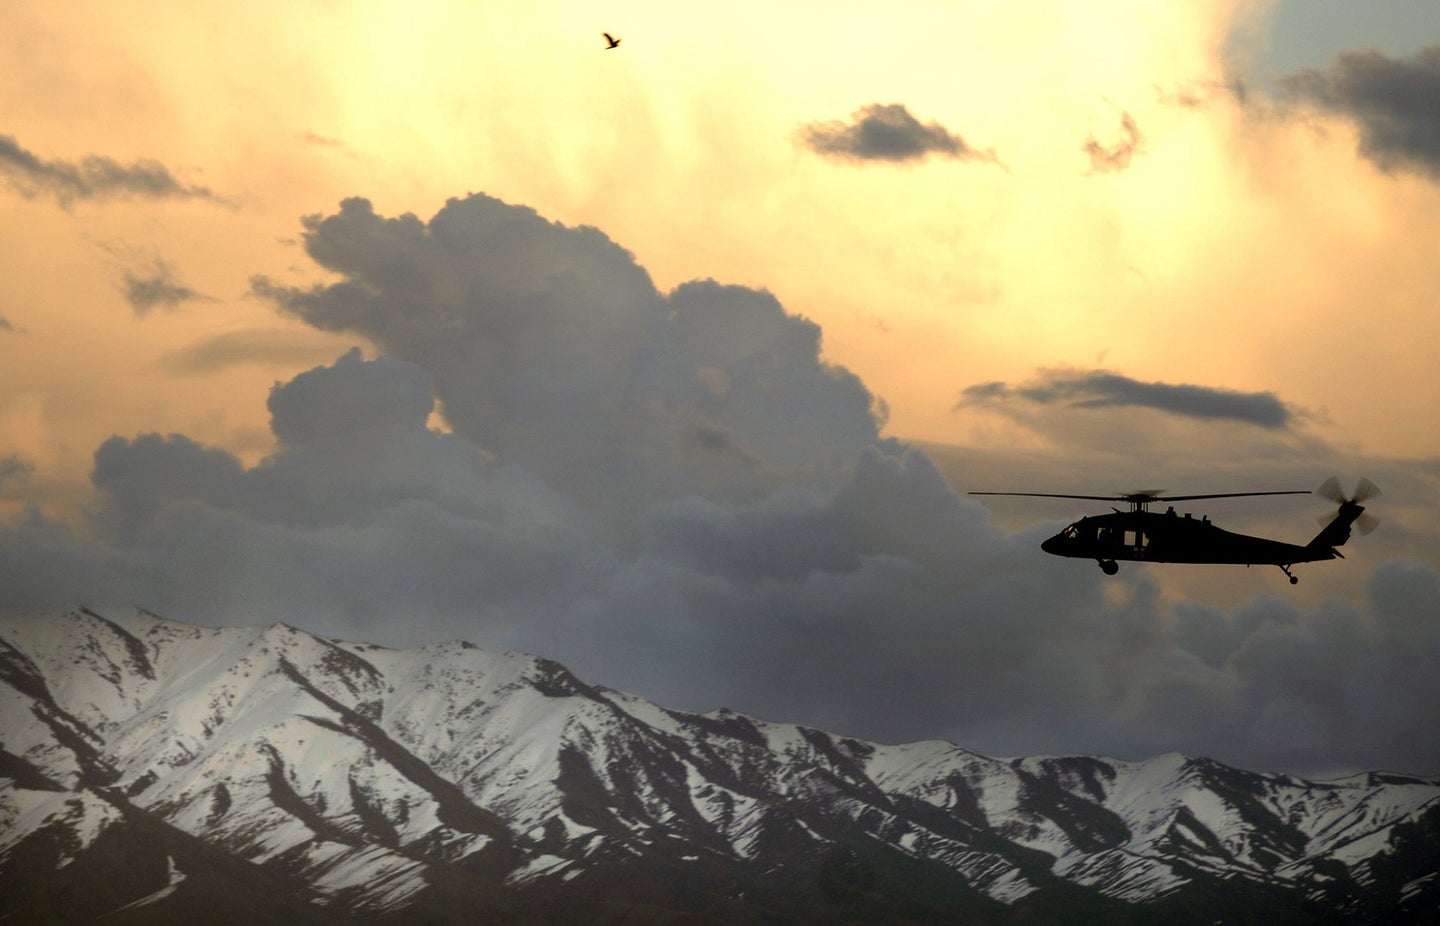 UH-60 Black Hawk army helicopter in Afghanistan